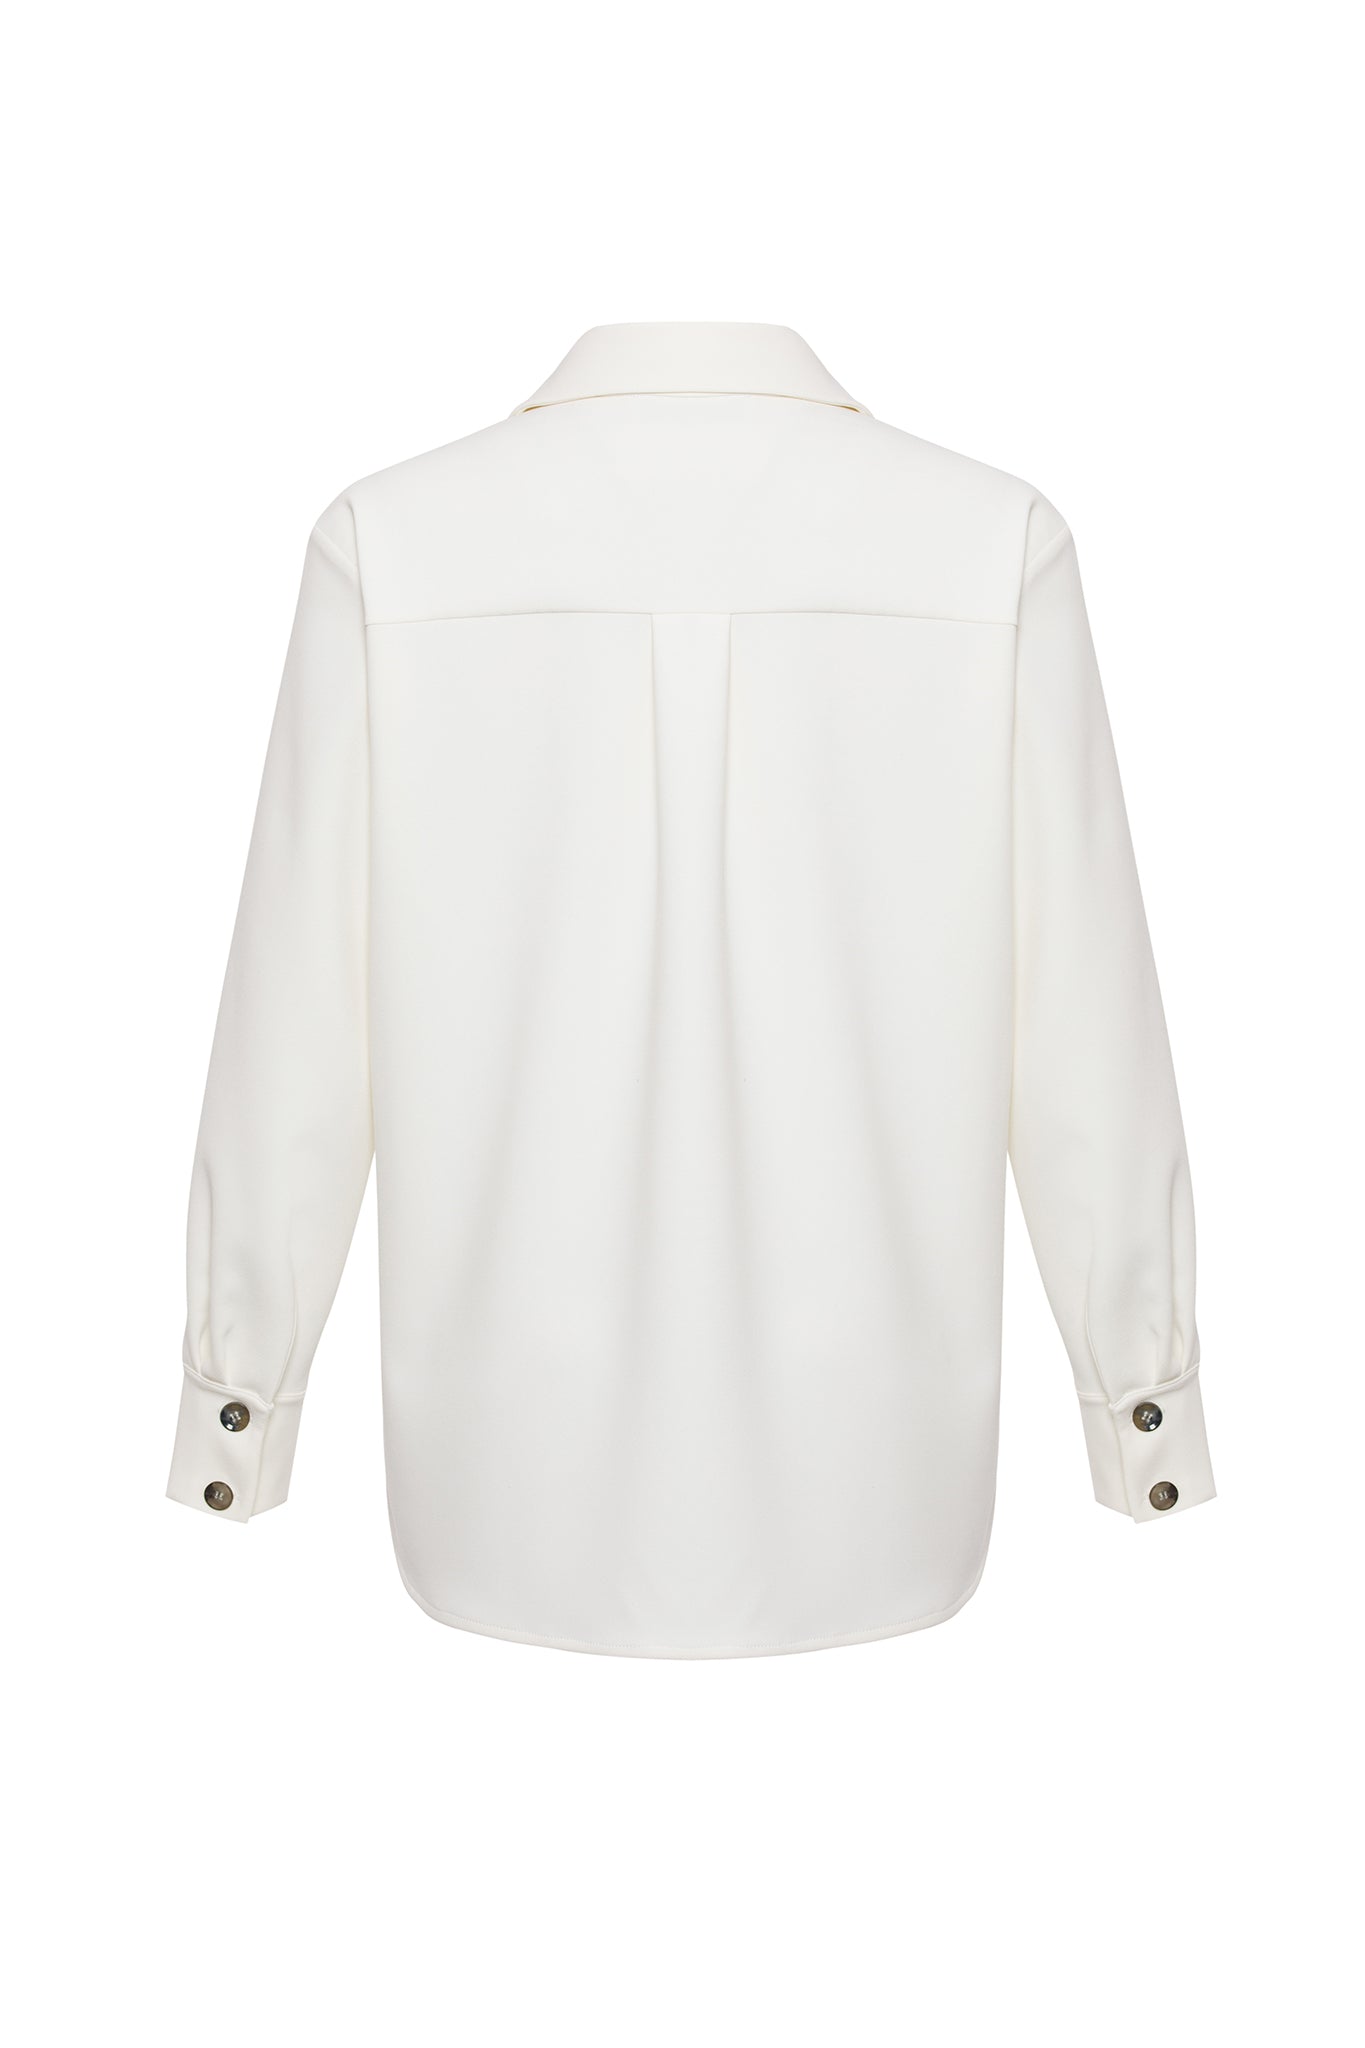 Overshirt with Pocket Embroidery